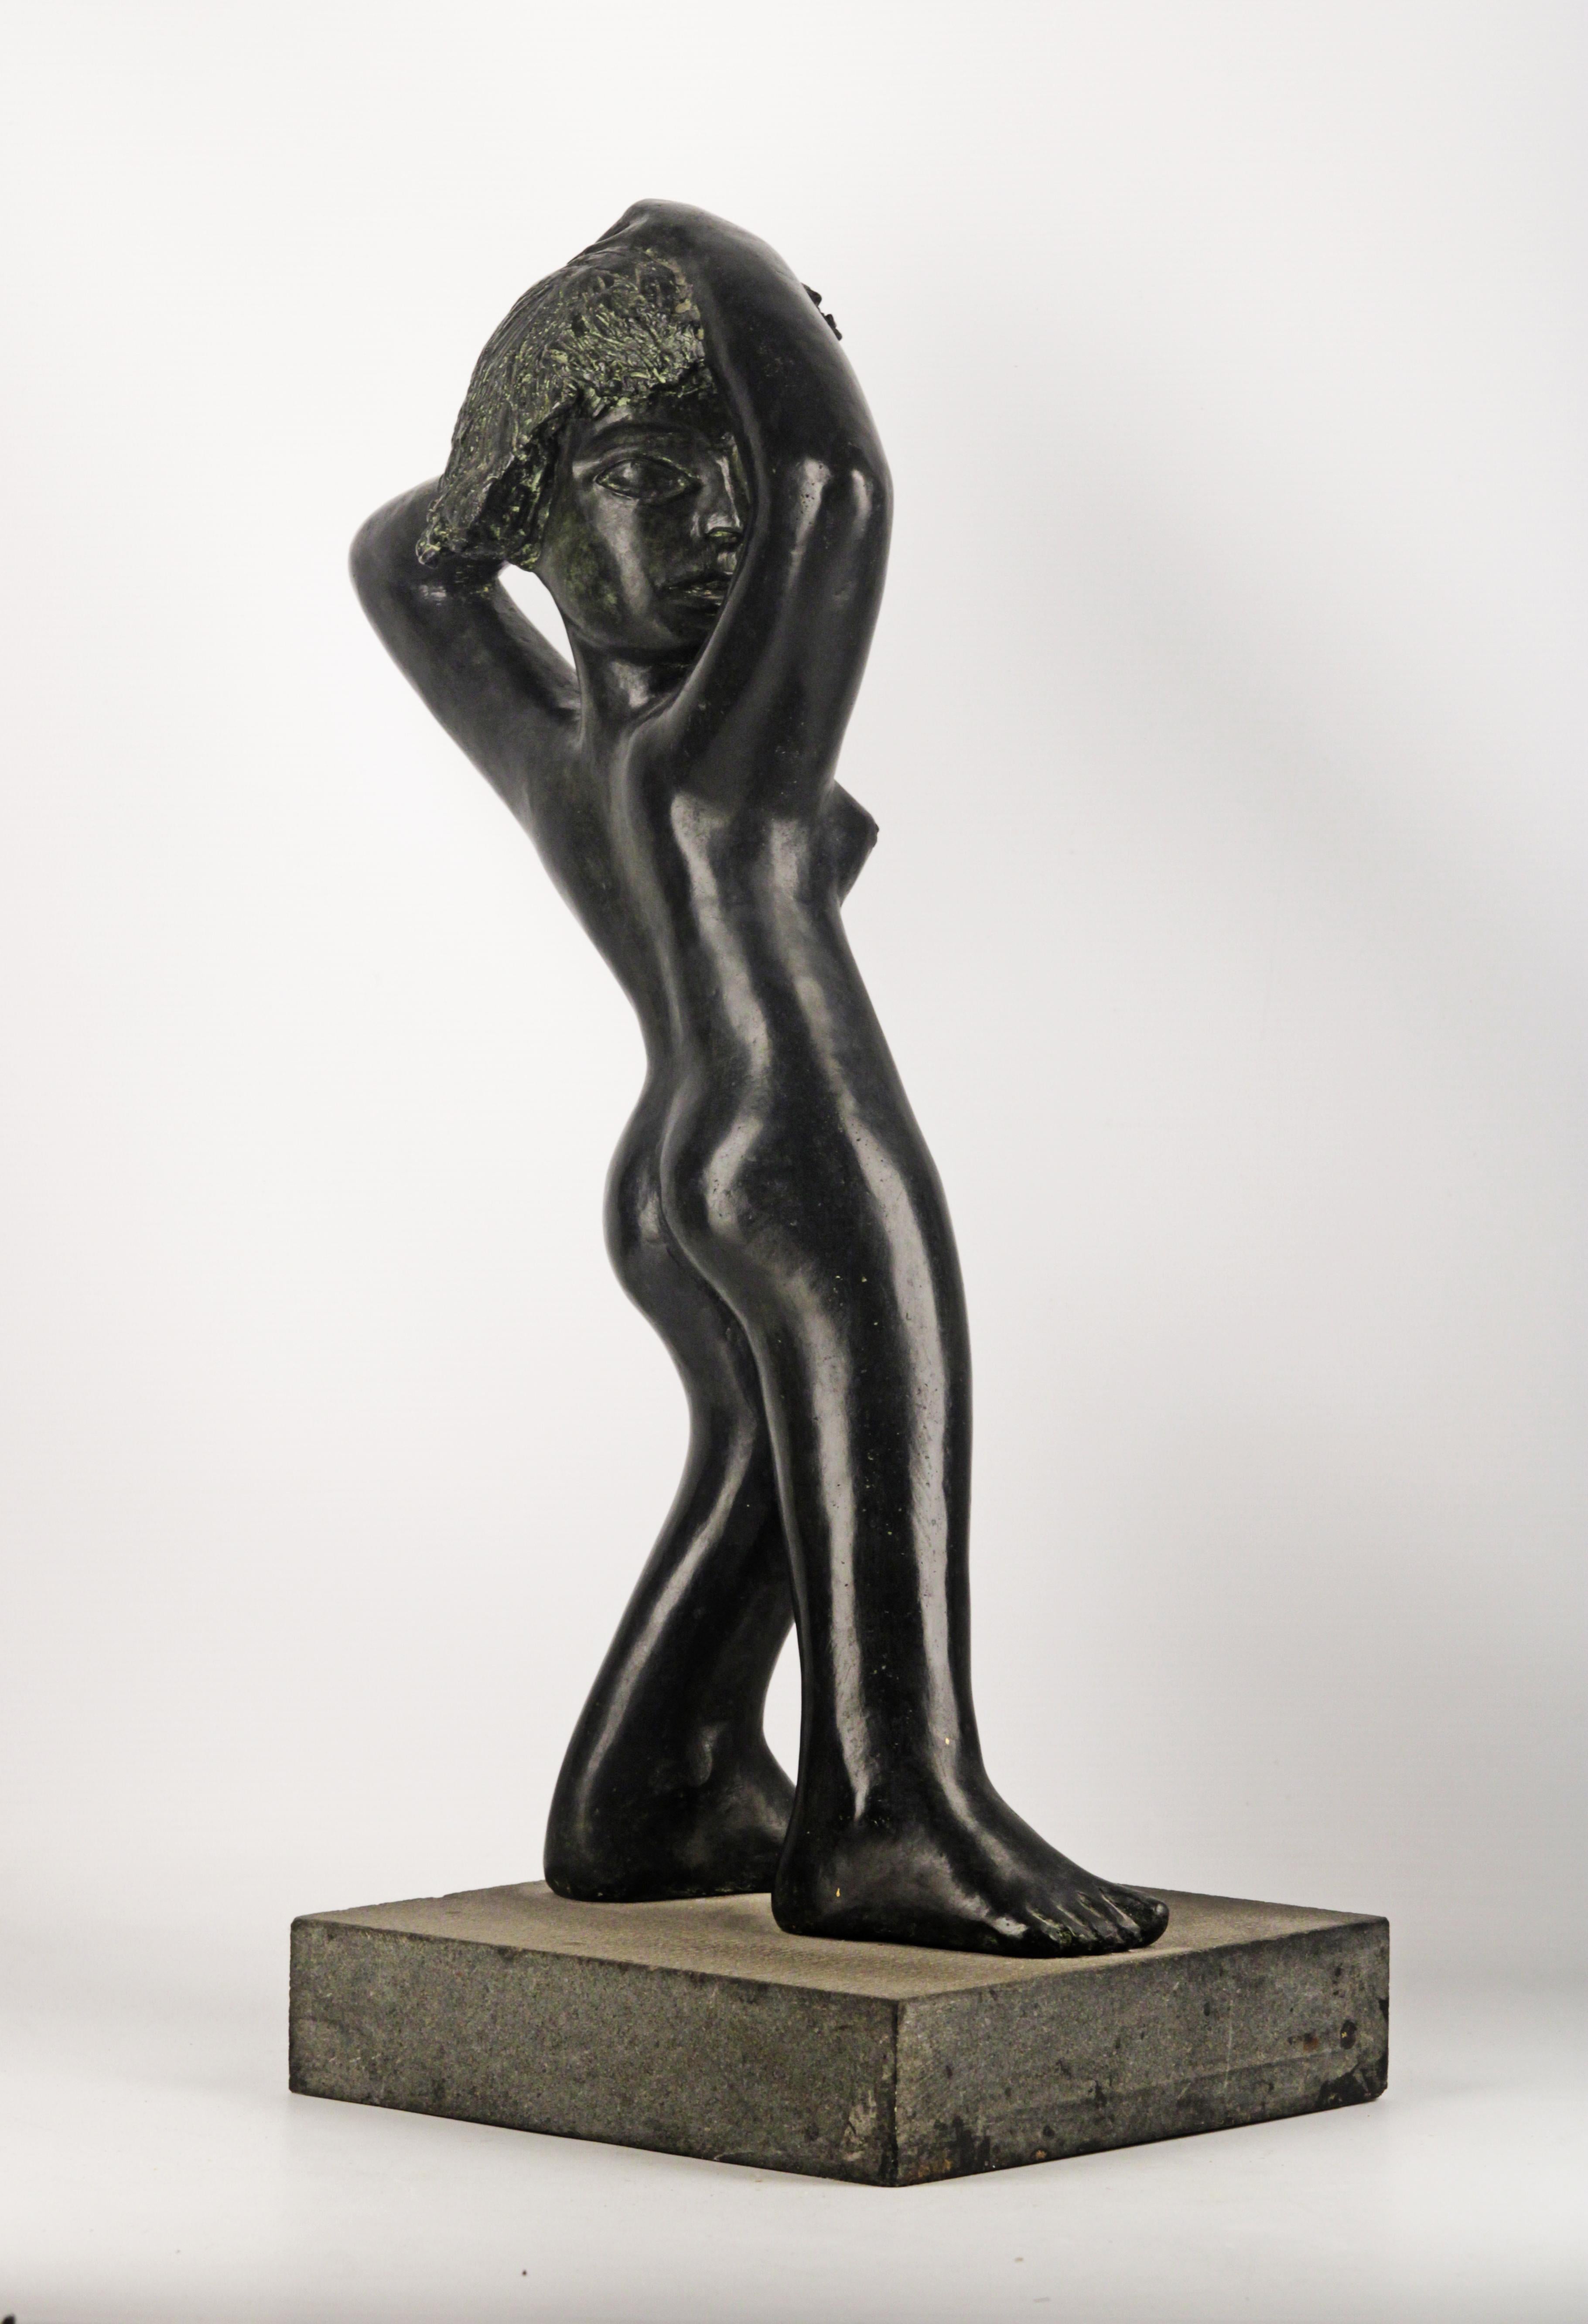 nude woman bronze sculpture
Erotic bronze of naked woman
black stone base
Sculpture attributed to Mariano Pages
Argentine sculptor
Circa 1960 Origin Argentina
excellent condition black patina
Mariano Pagés was an Argentine sculptor who was born in